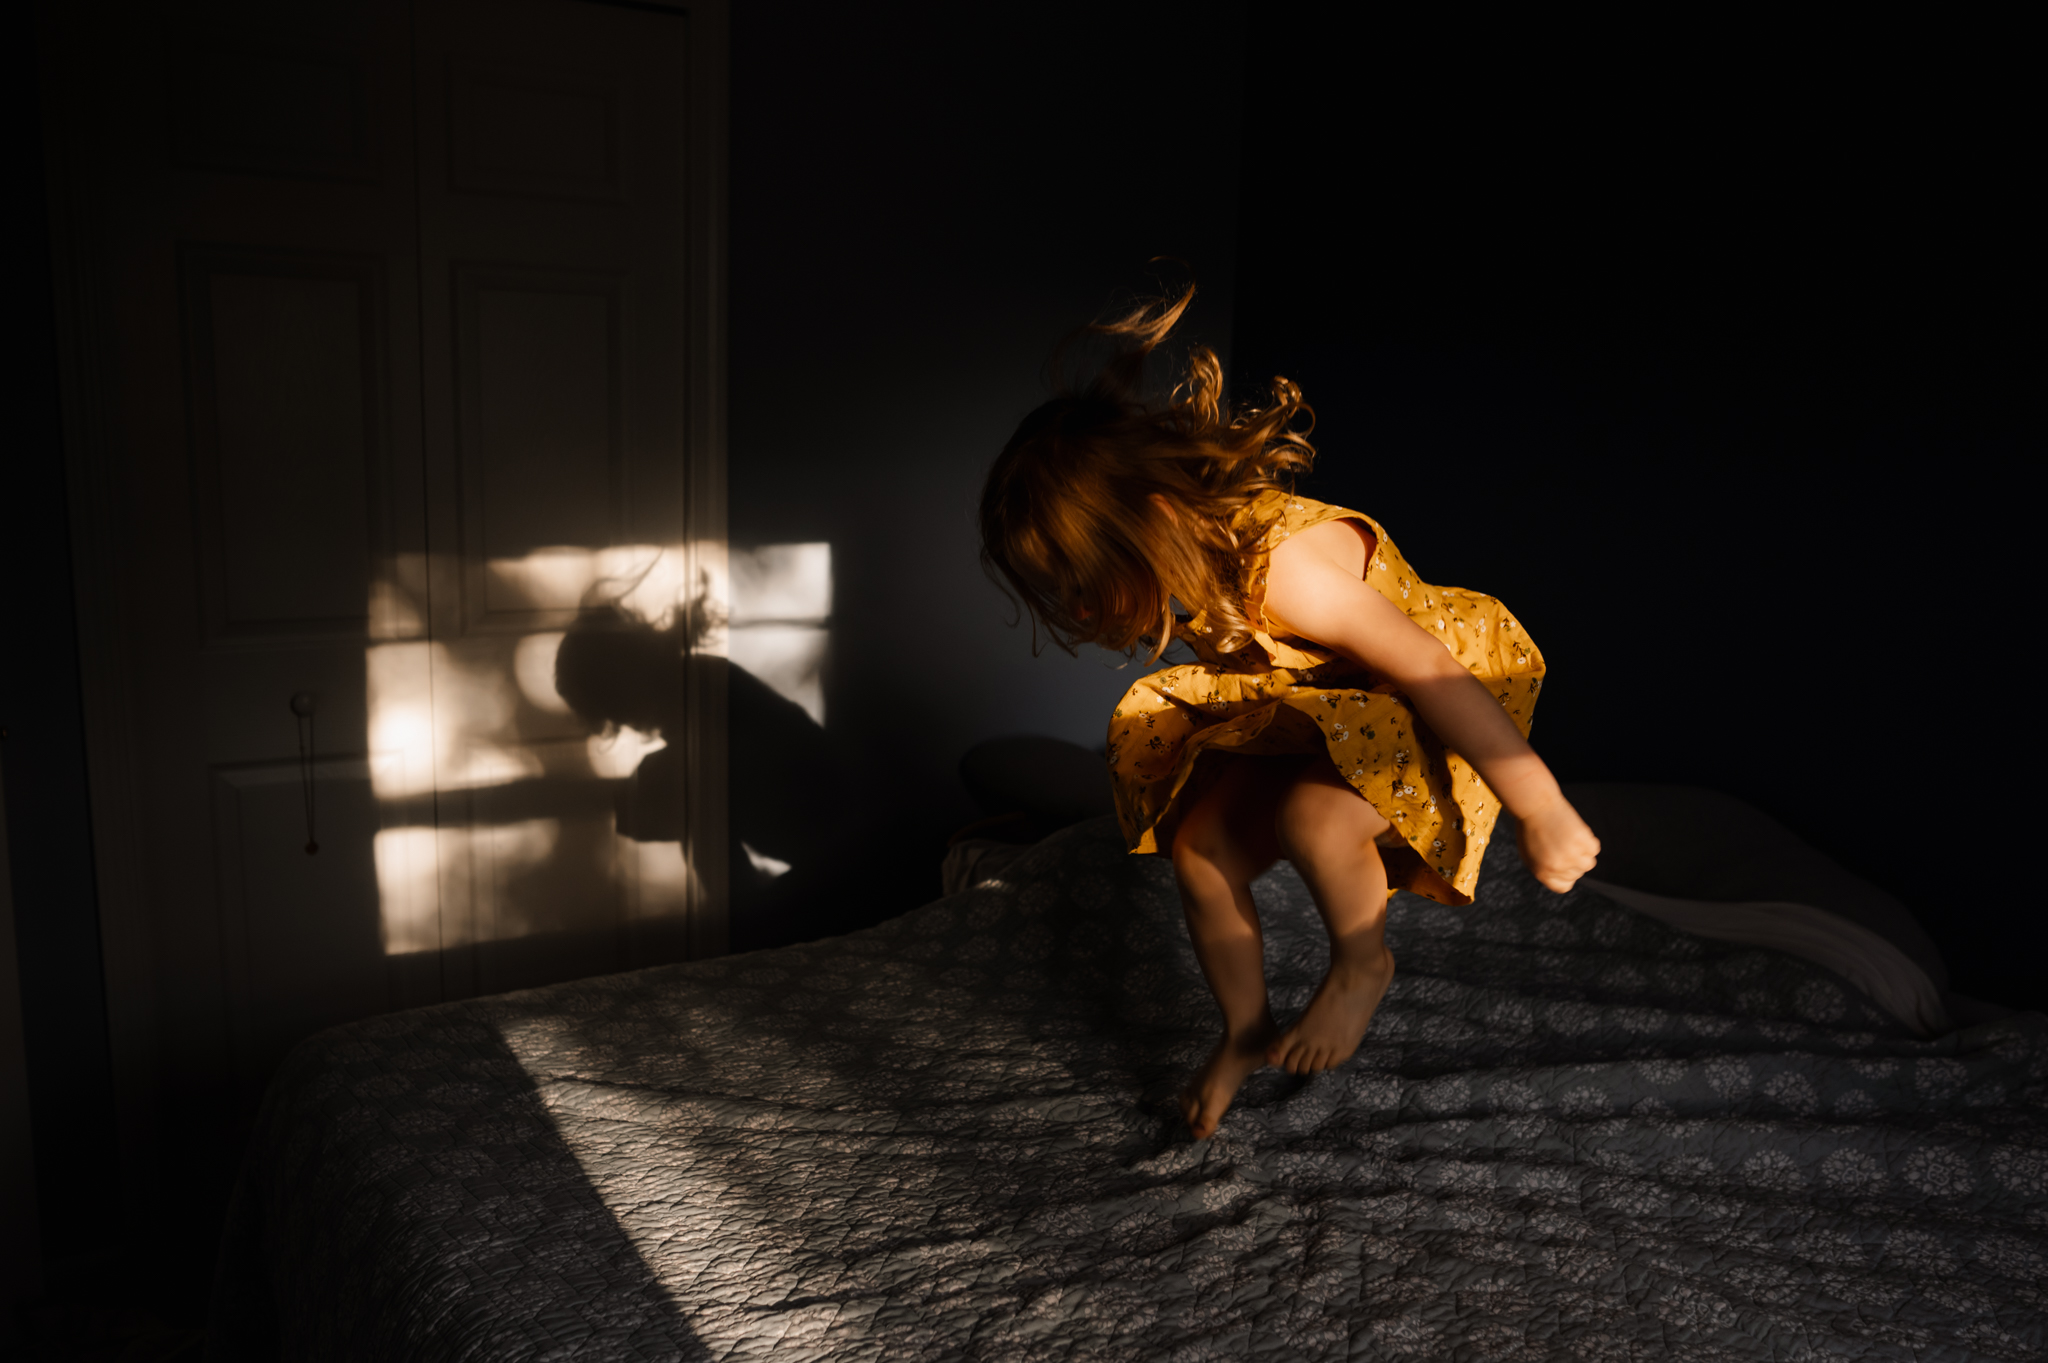 5 Spots in Your House to Capture Low Light Images - girl jumping on bed